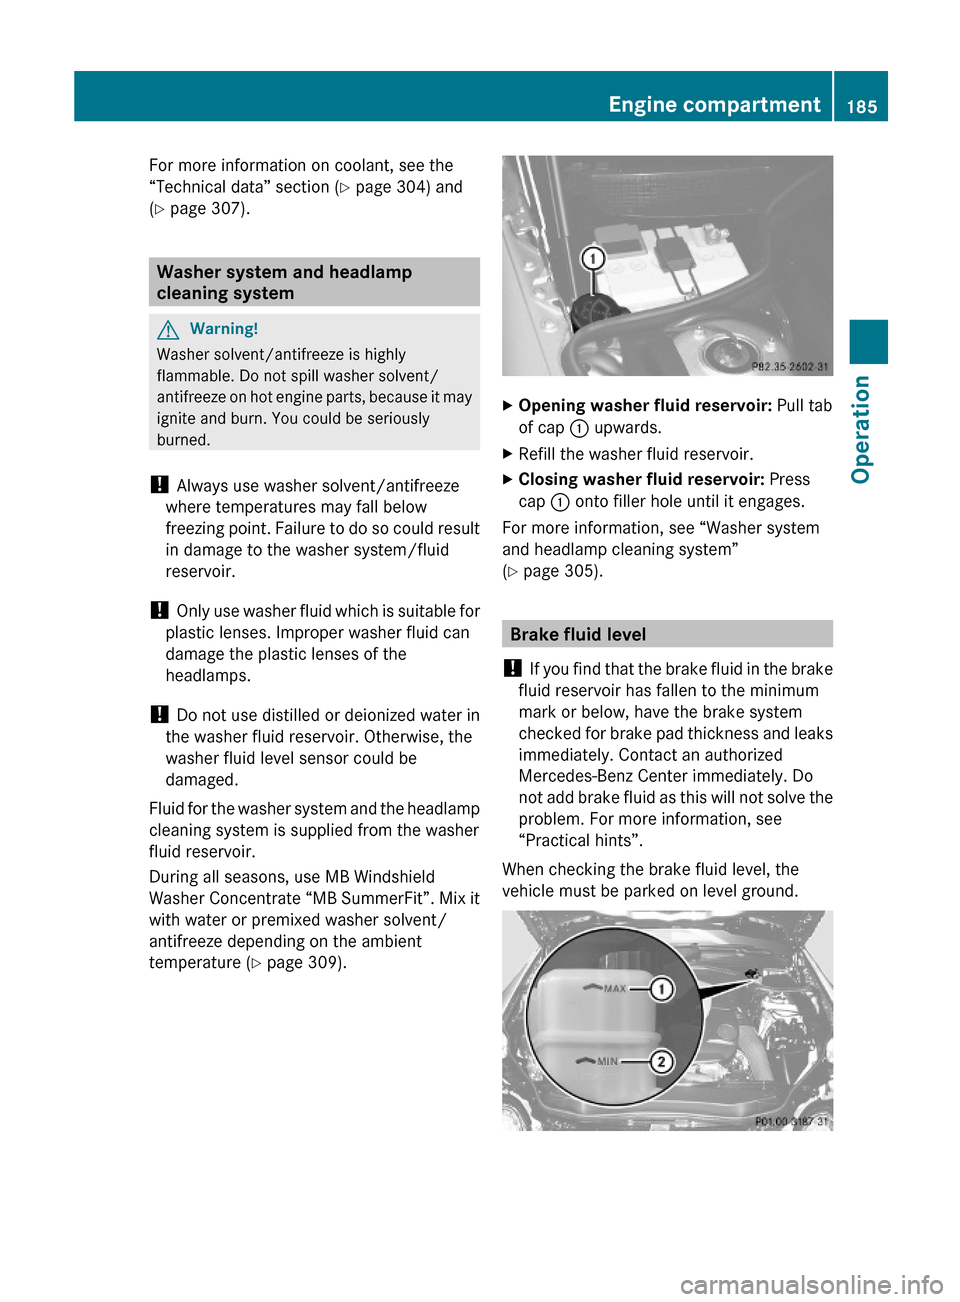 MERCEDES-BENZ SL65AMG 2011 R230 Owners Manual For more information on coolant, see the
“Technical data” section (Y page 304) and
(Y page 307).
Washer system and headlamp 
cleaning system
GWarning!
Washer solvent/antifreeze is highly
flammable